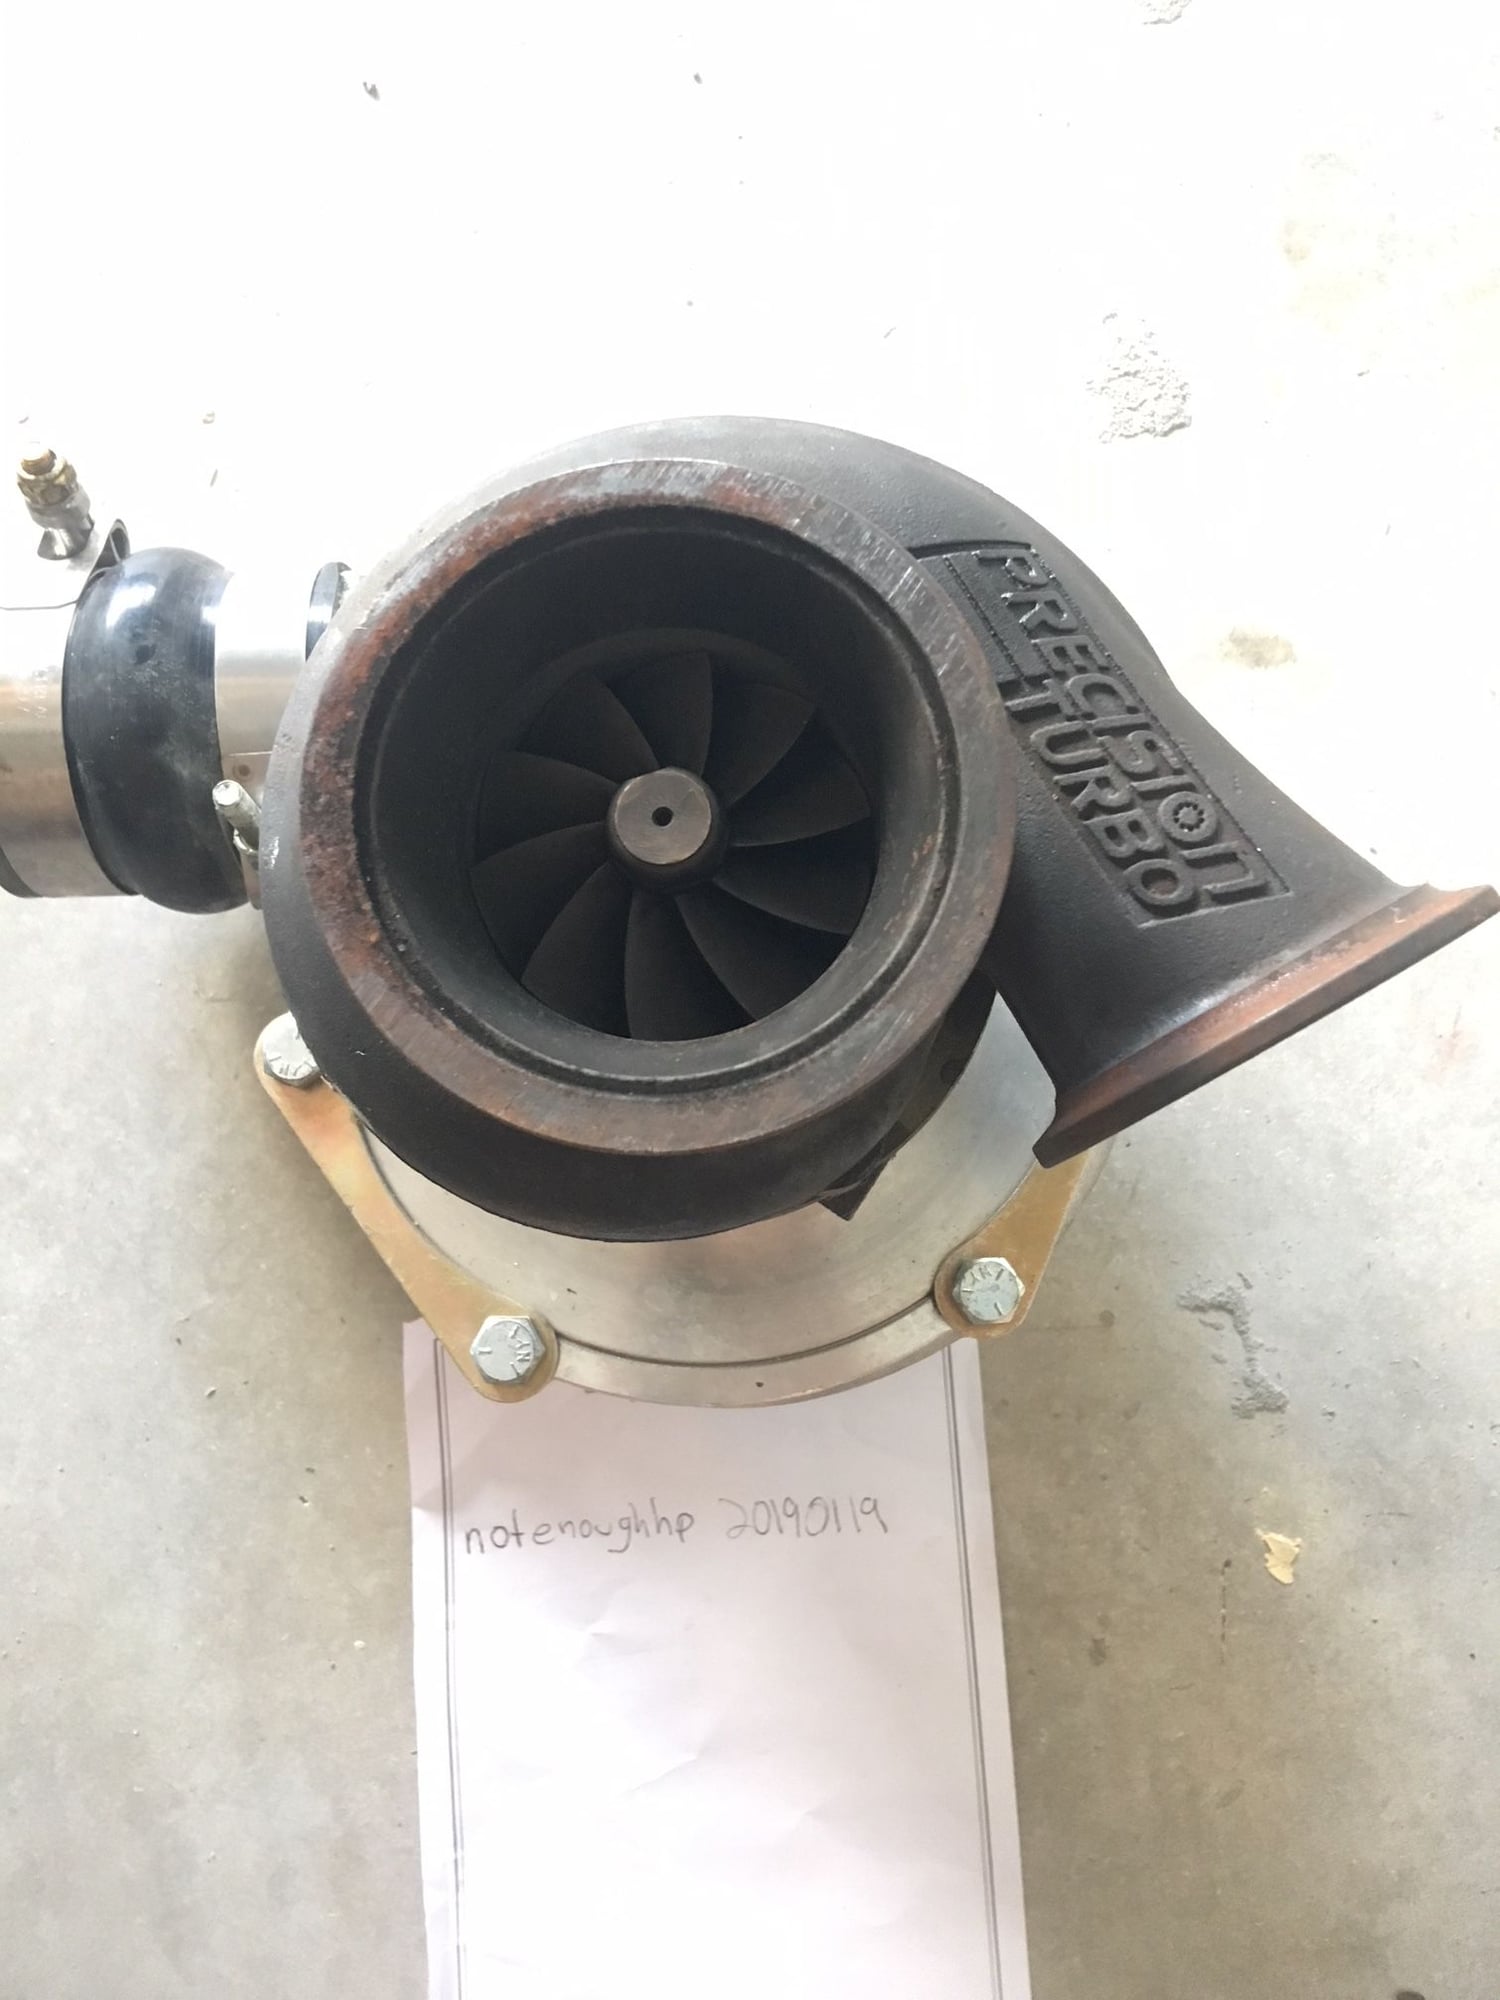 Engine - Power Adders - GSC Billet S1's, Walbro 400, PTE 5858, Stock coil pack - Used - Parkland, FL 33076, United States